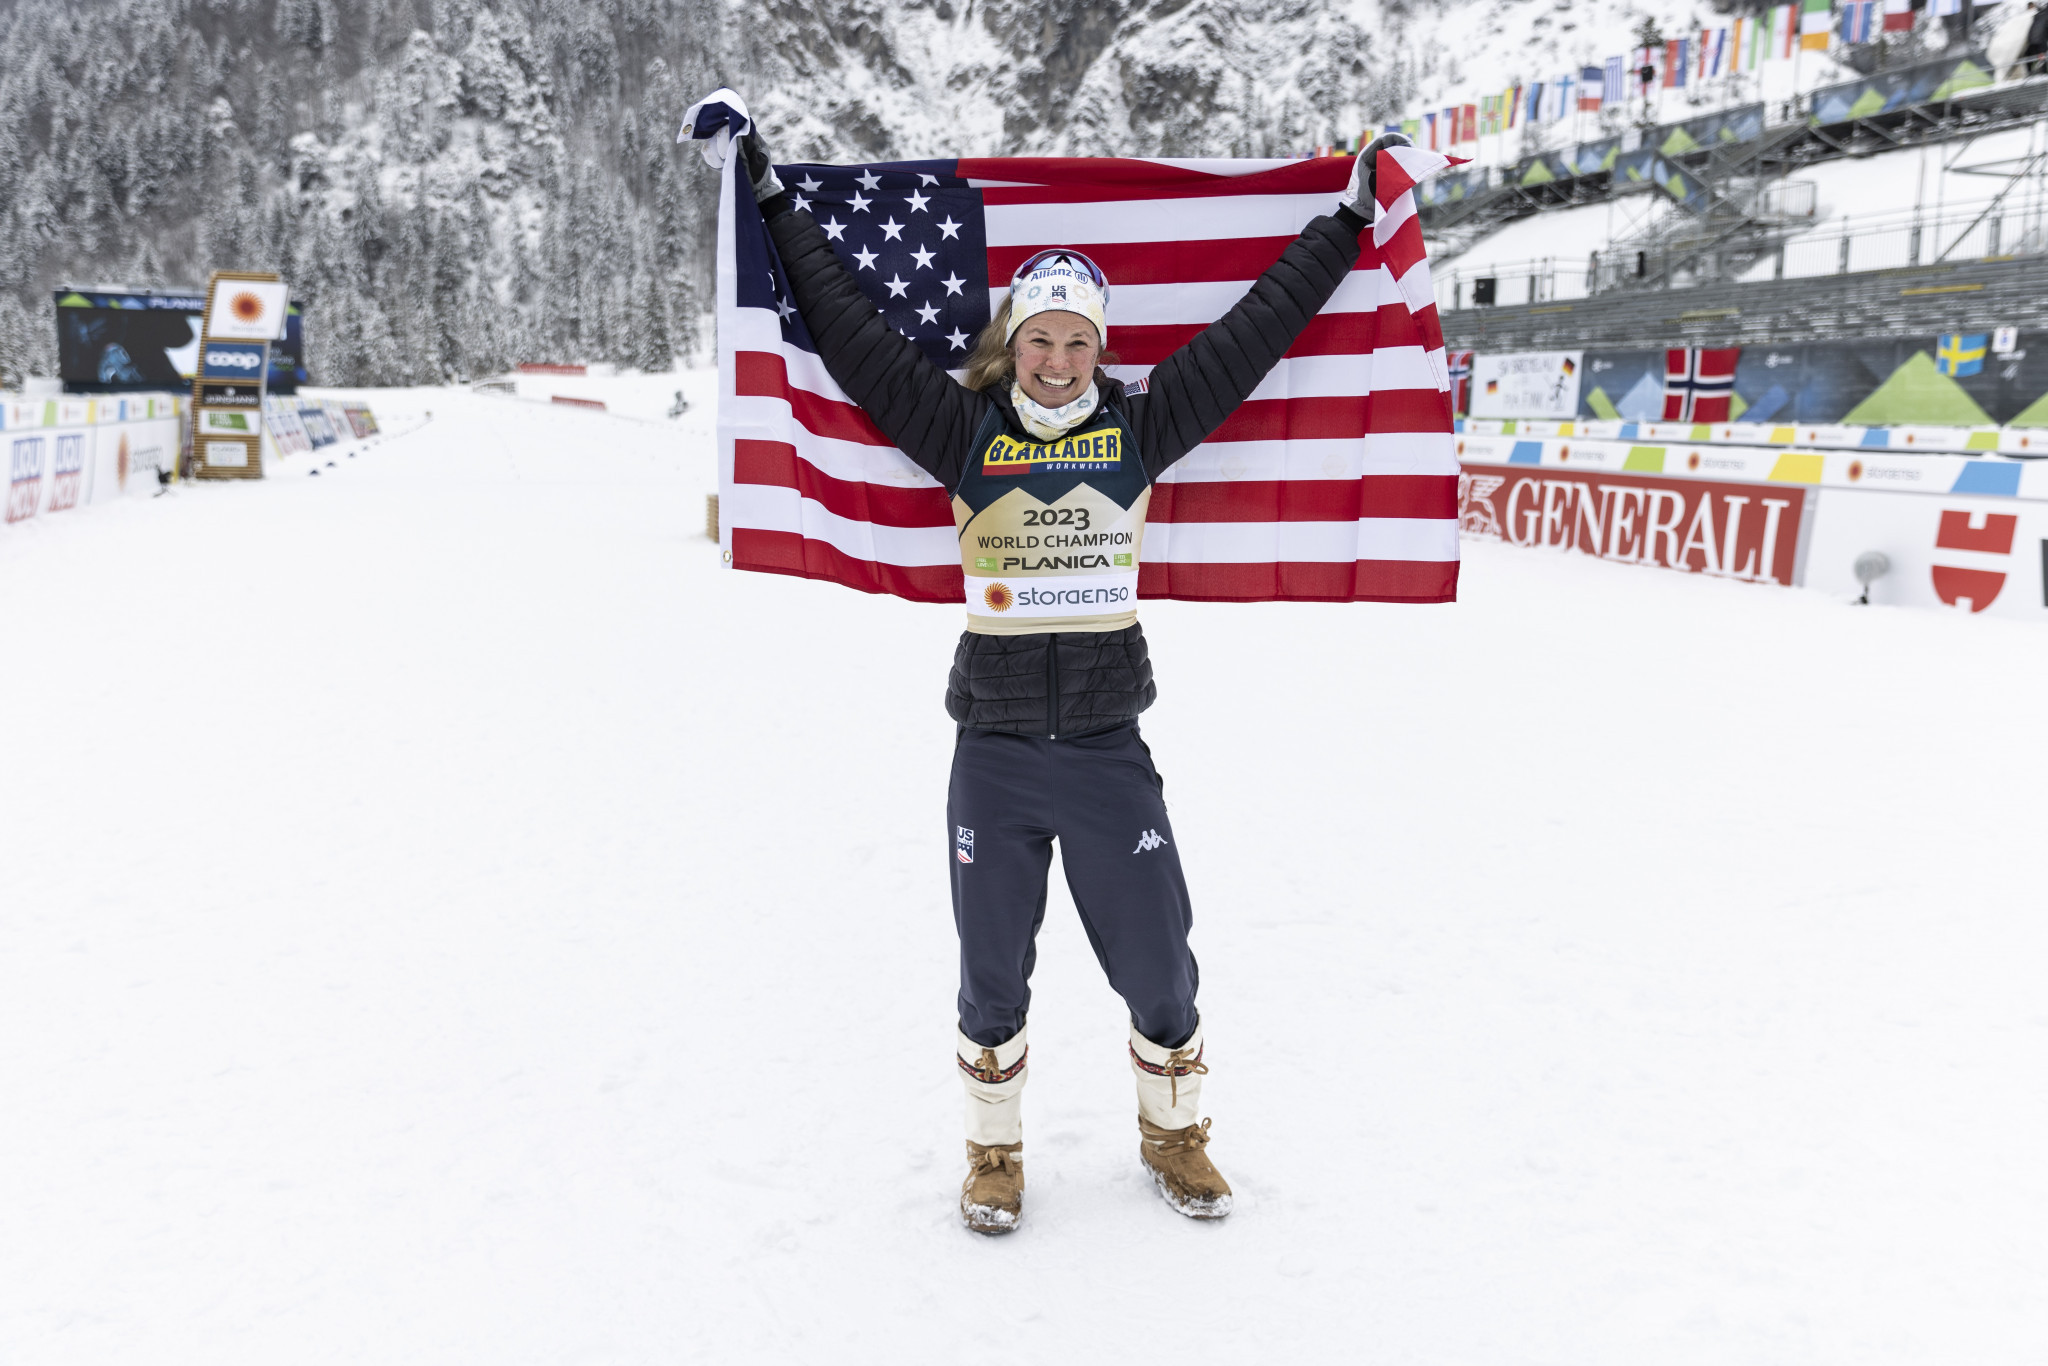 Diggins delight with historic cross-country gold for US at Nordic World Ski Championships